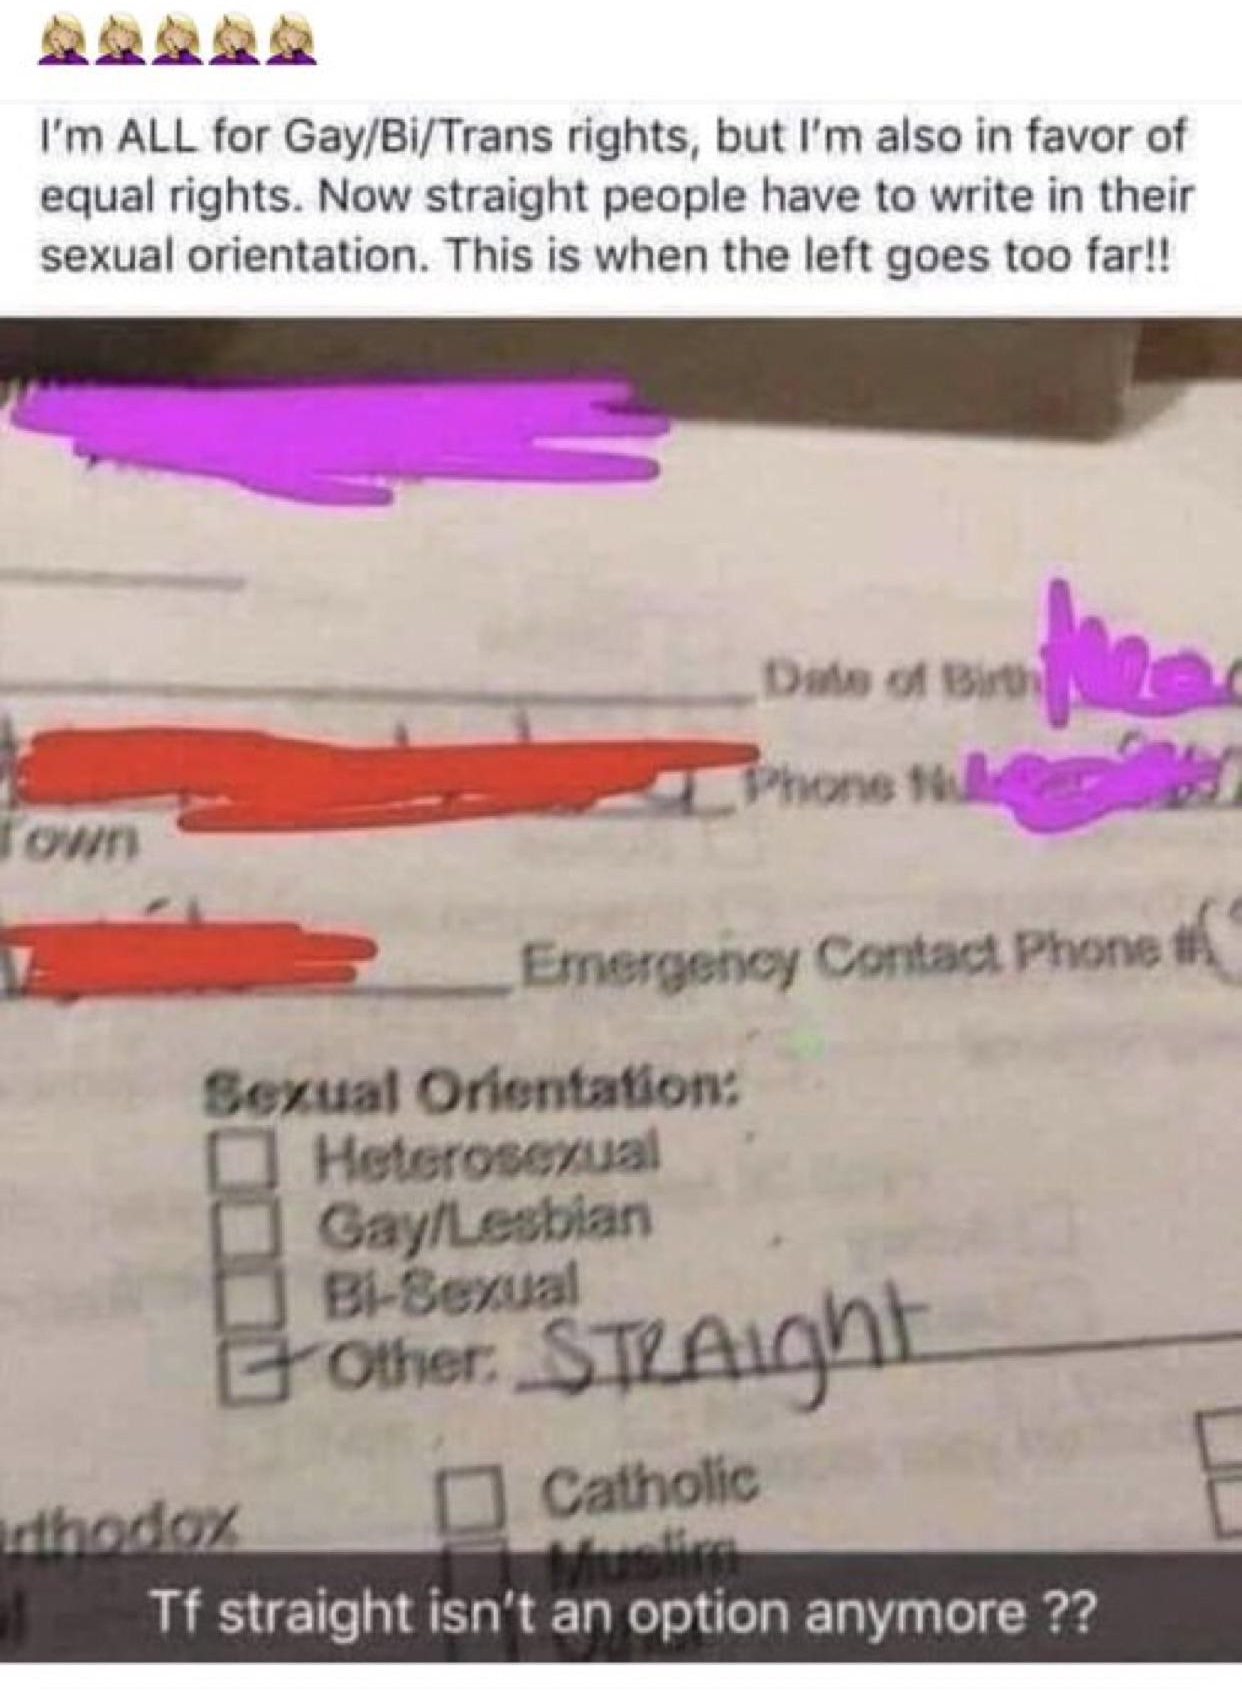 I'm All for GayBiTrans rights, but I'm also in favor of equal rights. Now straight people have to write in their sexual orientation. This is when the left goes too far!! Das of B Phone 140 Emergency Contact Phone Sexual Orientation Heterosexual GayLesbian